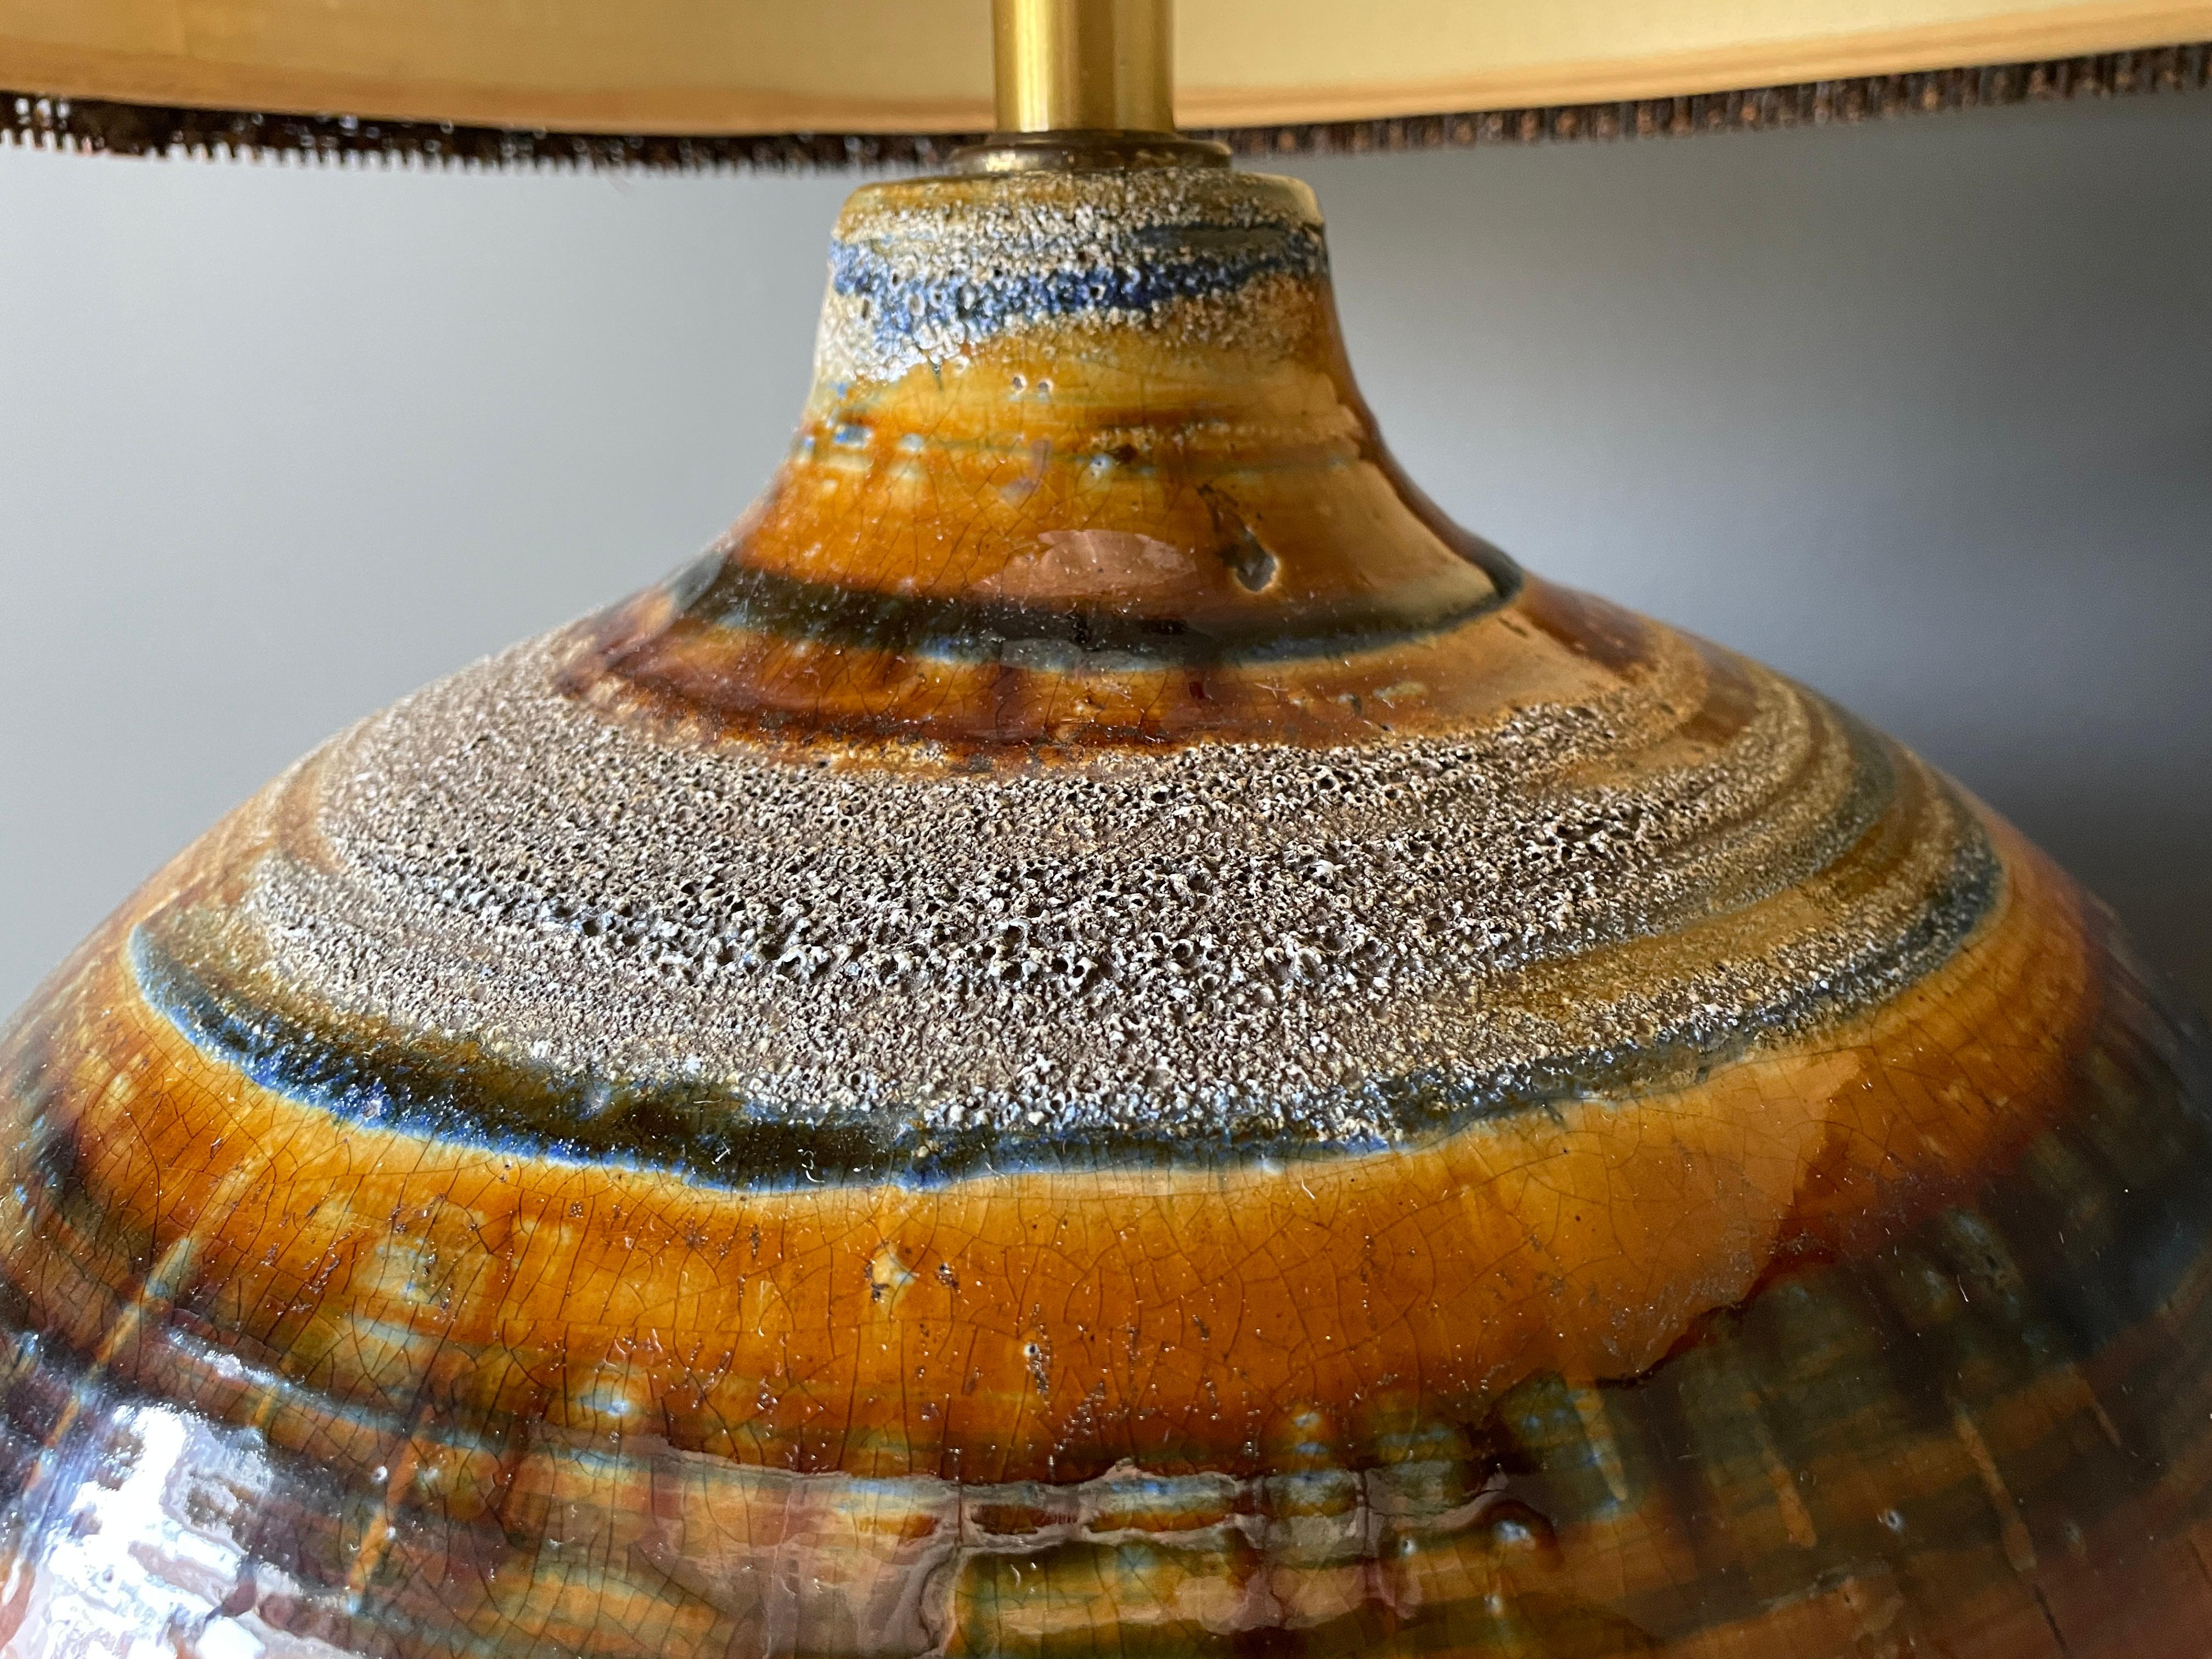 Vintage drip glaze lamp. Beautiful colors and contrasting textures. Shade is by textile designer Maria Kipp of Los Angeles.